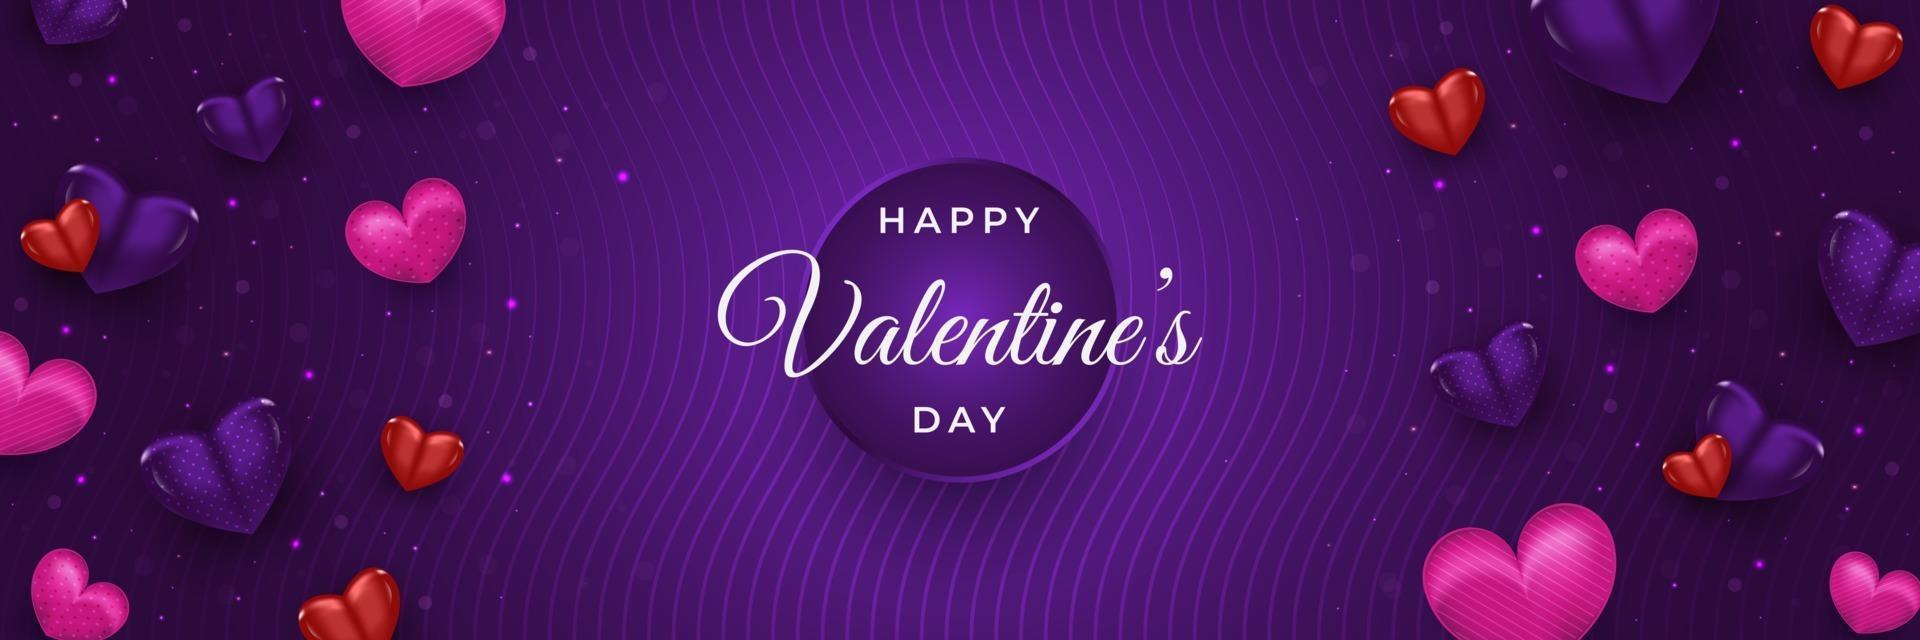 Happy Valentine's day banner or poster for header with realistic colorful hearts spread on purple background vector